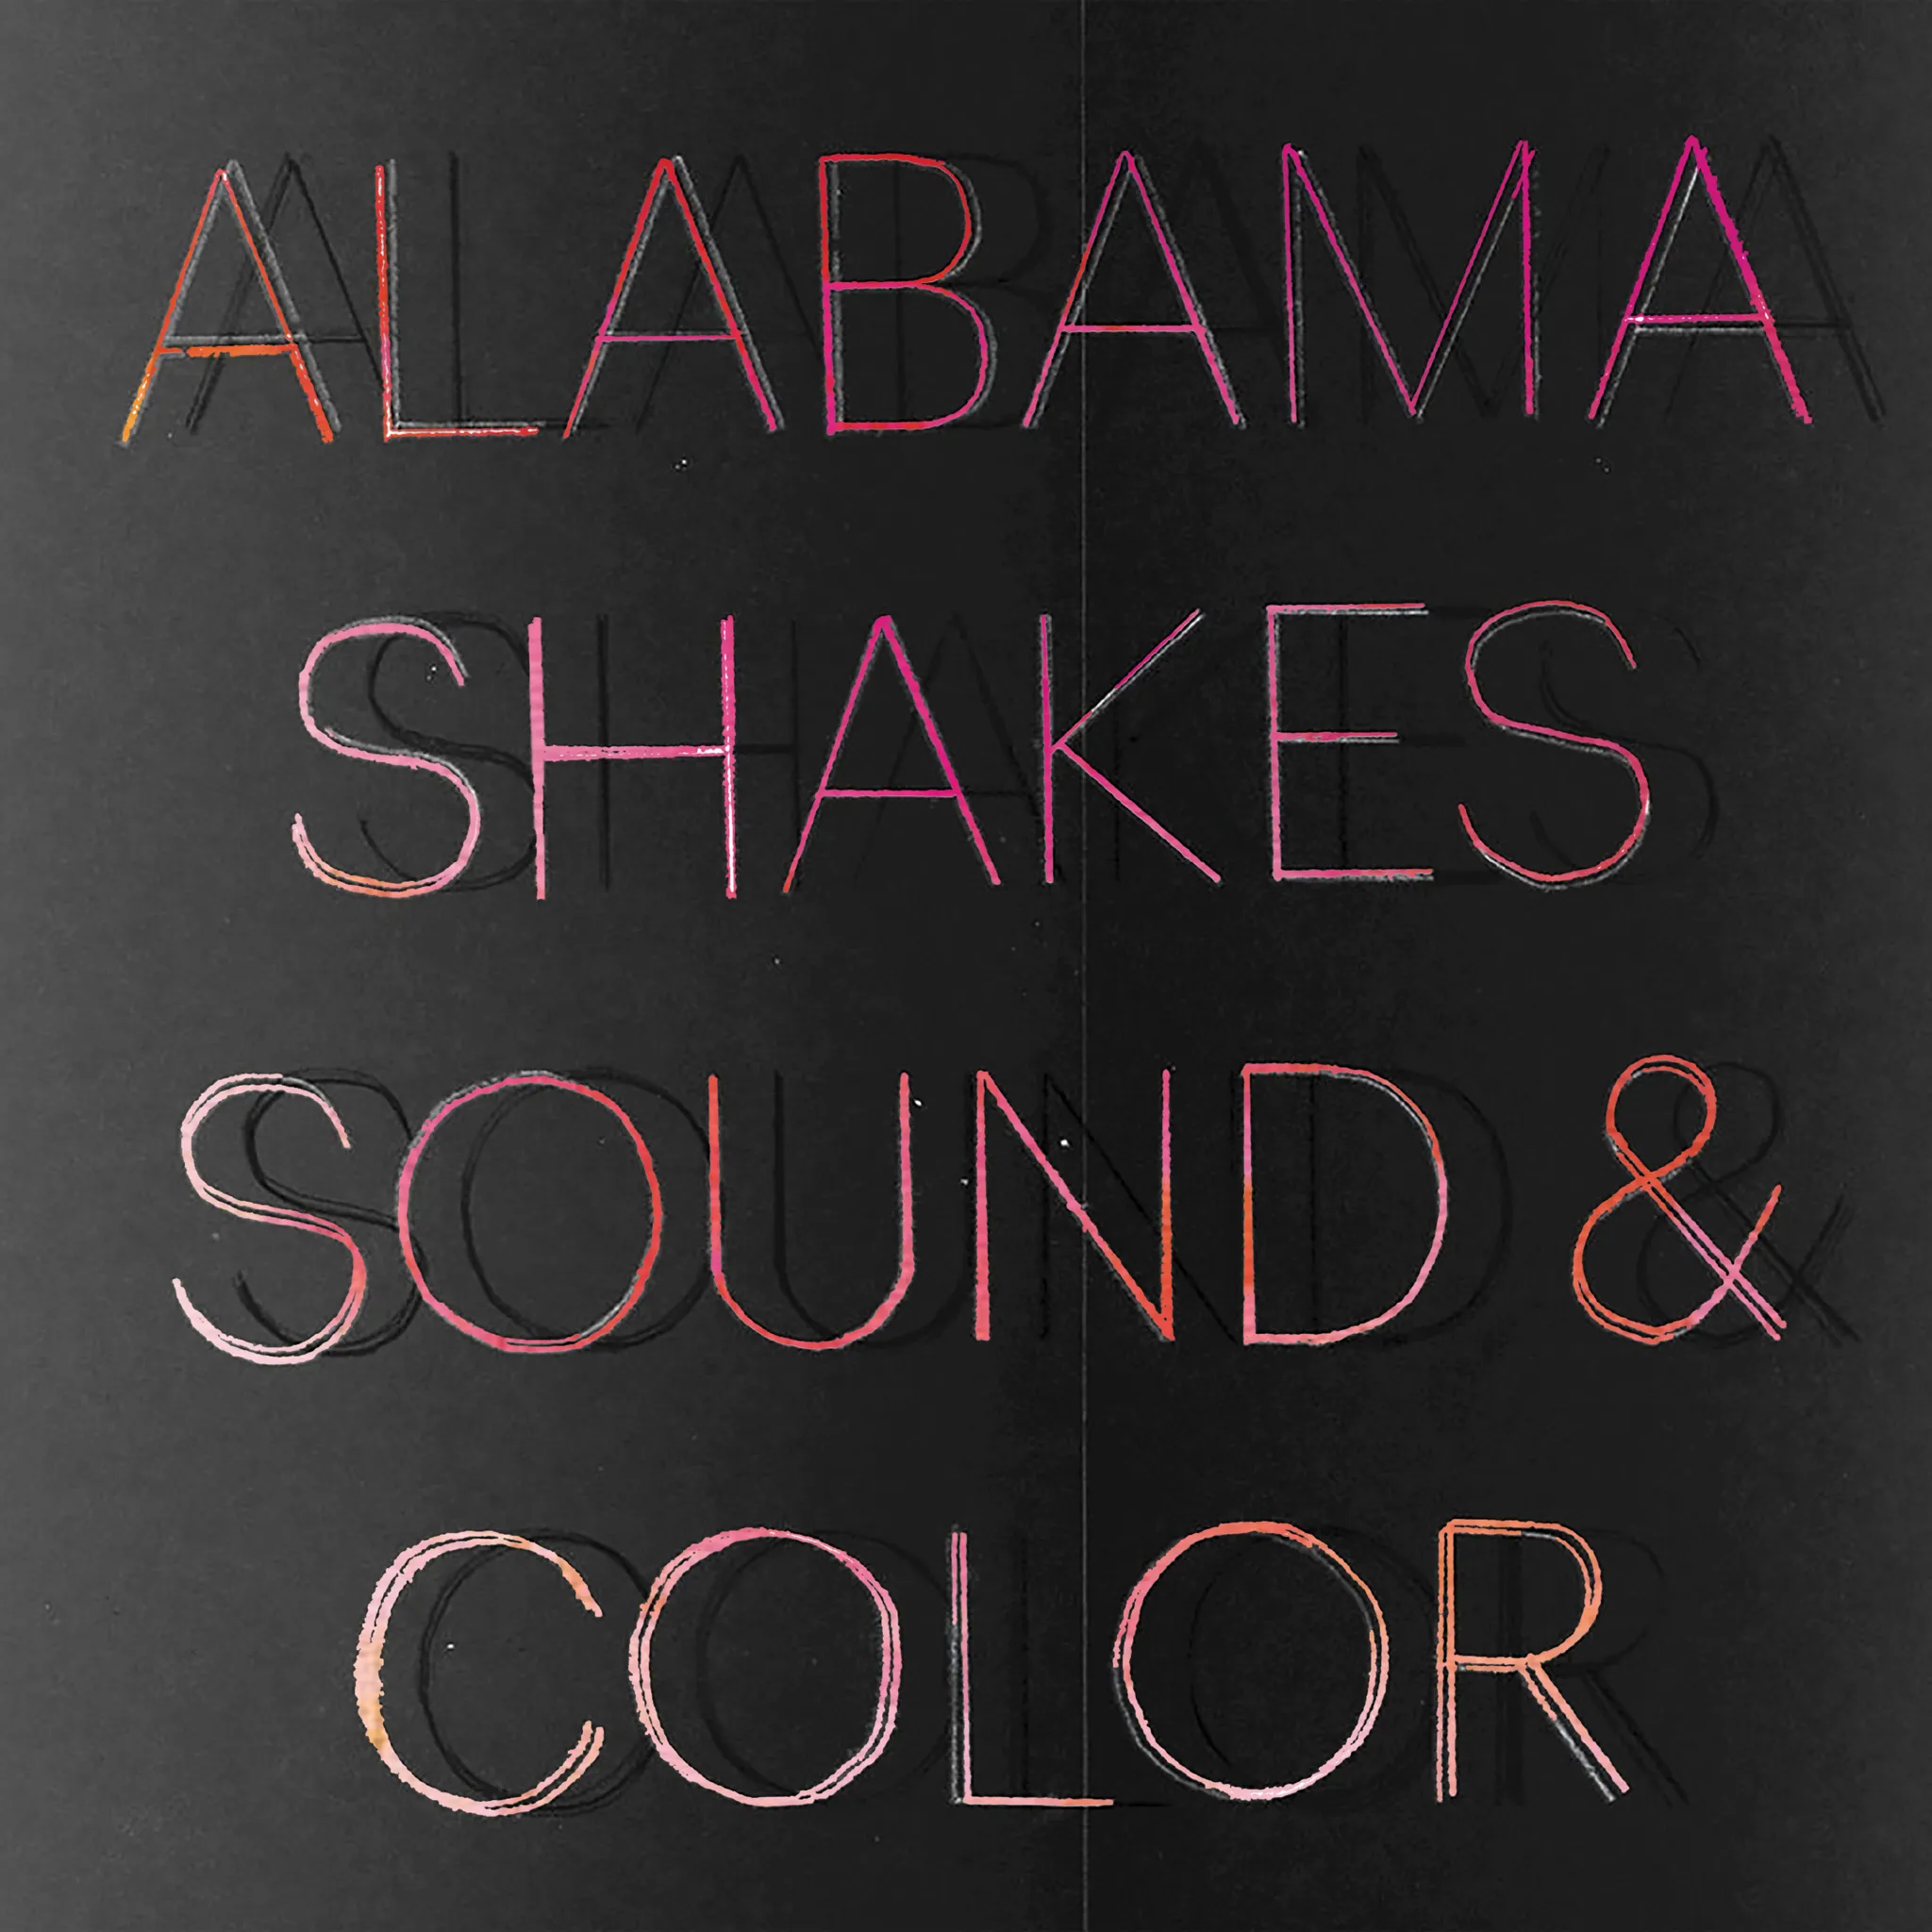 <strong>Alabama Shakes - Sound and Color (Deluxe Edition)</strong> (Vinyl LP - pink)